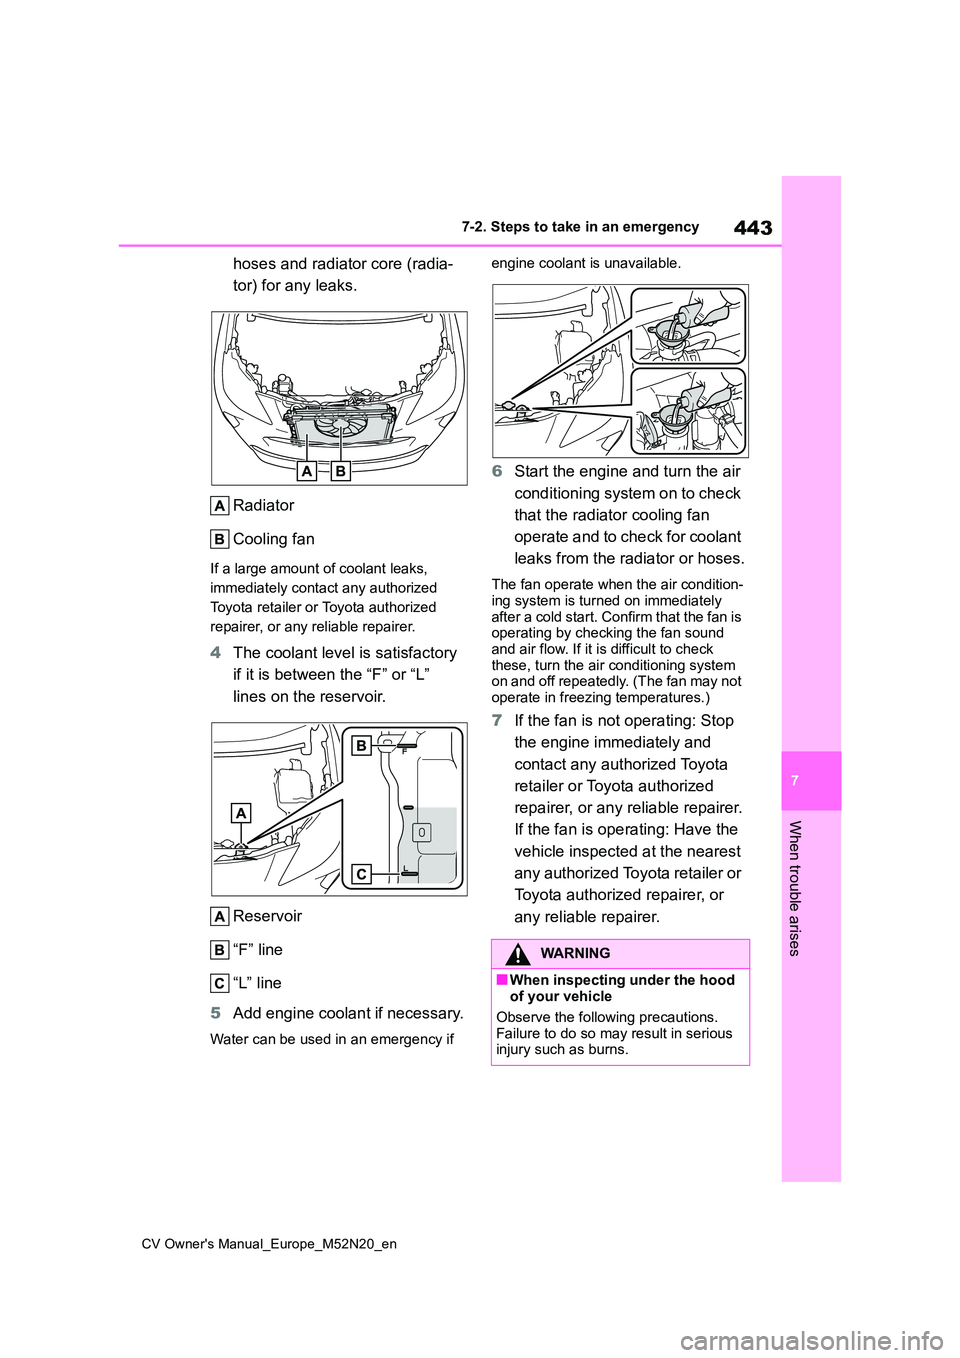 TOYOTA YARIS CROSS 2022  Owners Manual 443
7
CV Owner's Manual_Europe_M52N20_en
7-2. Steps to take in an emergency
When trouble arises
hoses and radiator core (radia- 
tor) for any leaks. 
Radiator 
Cooling fan
If a large amount of coo